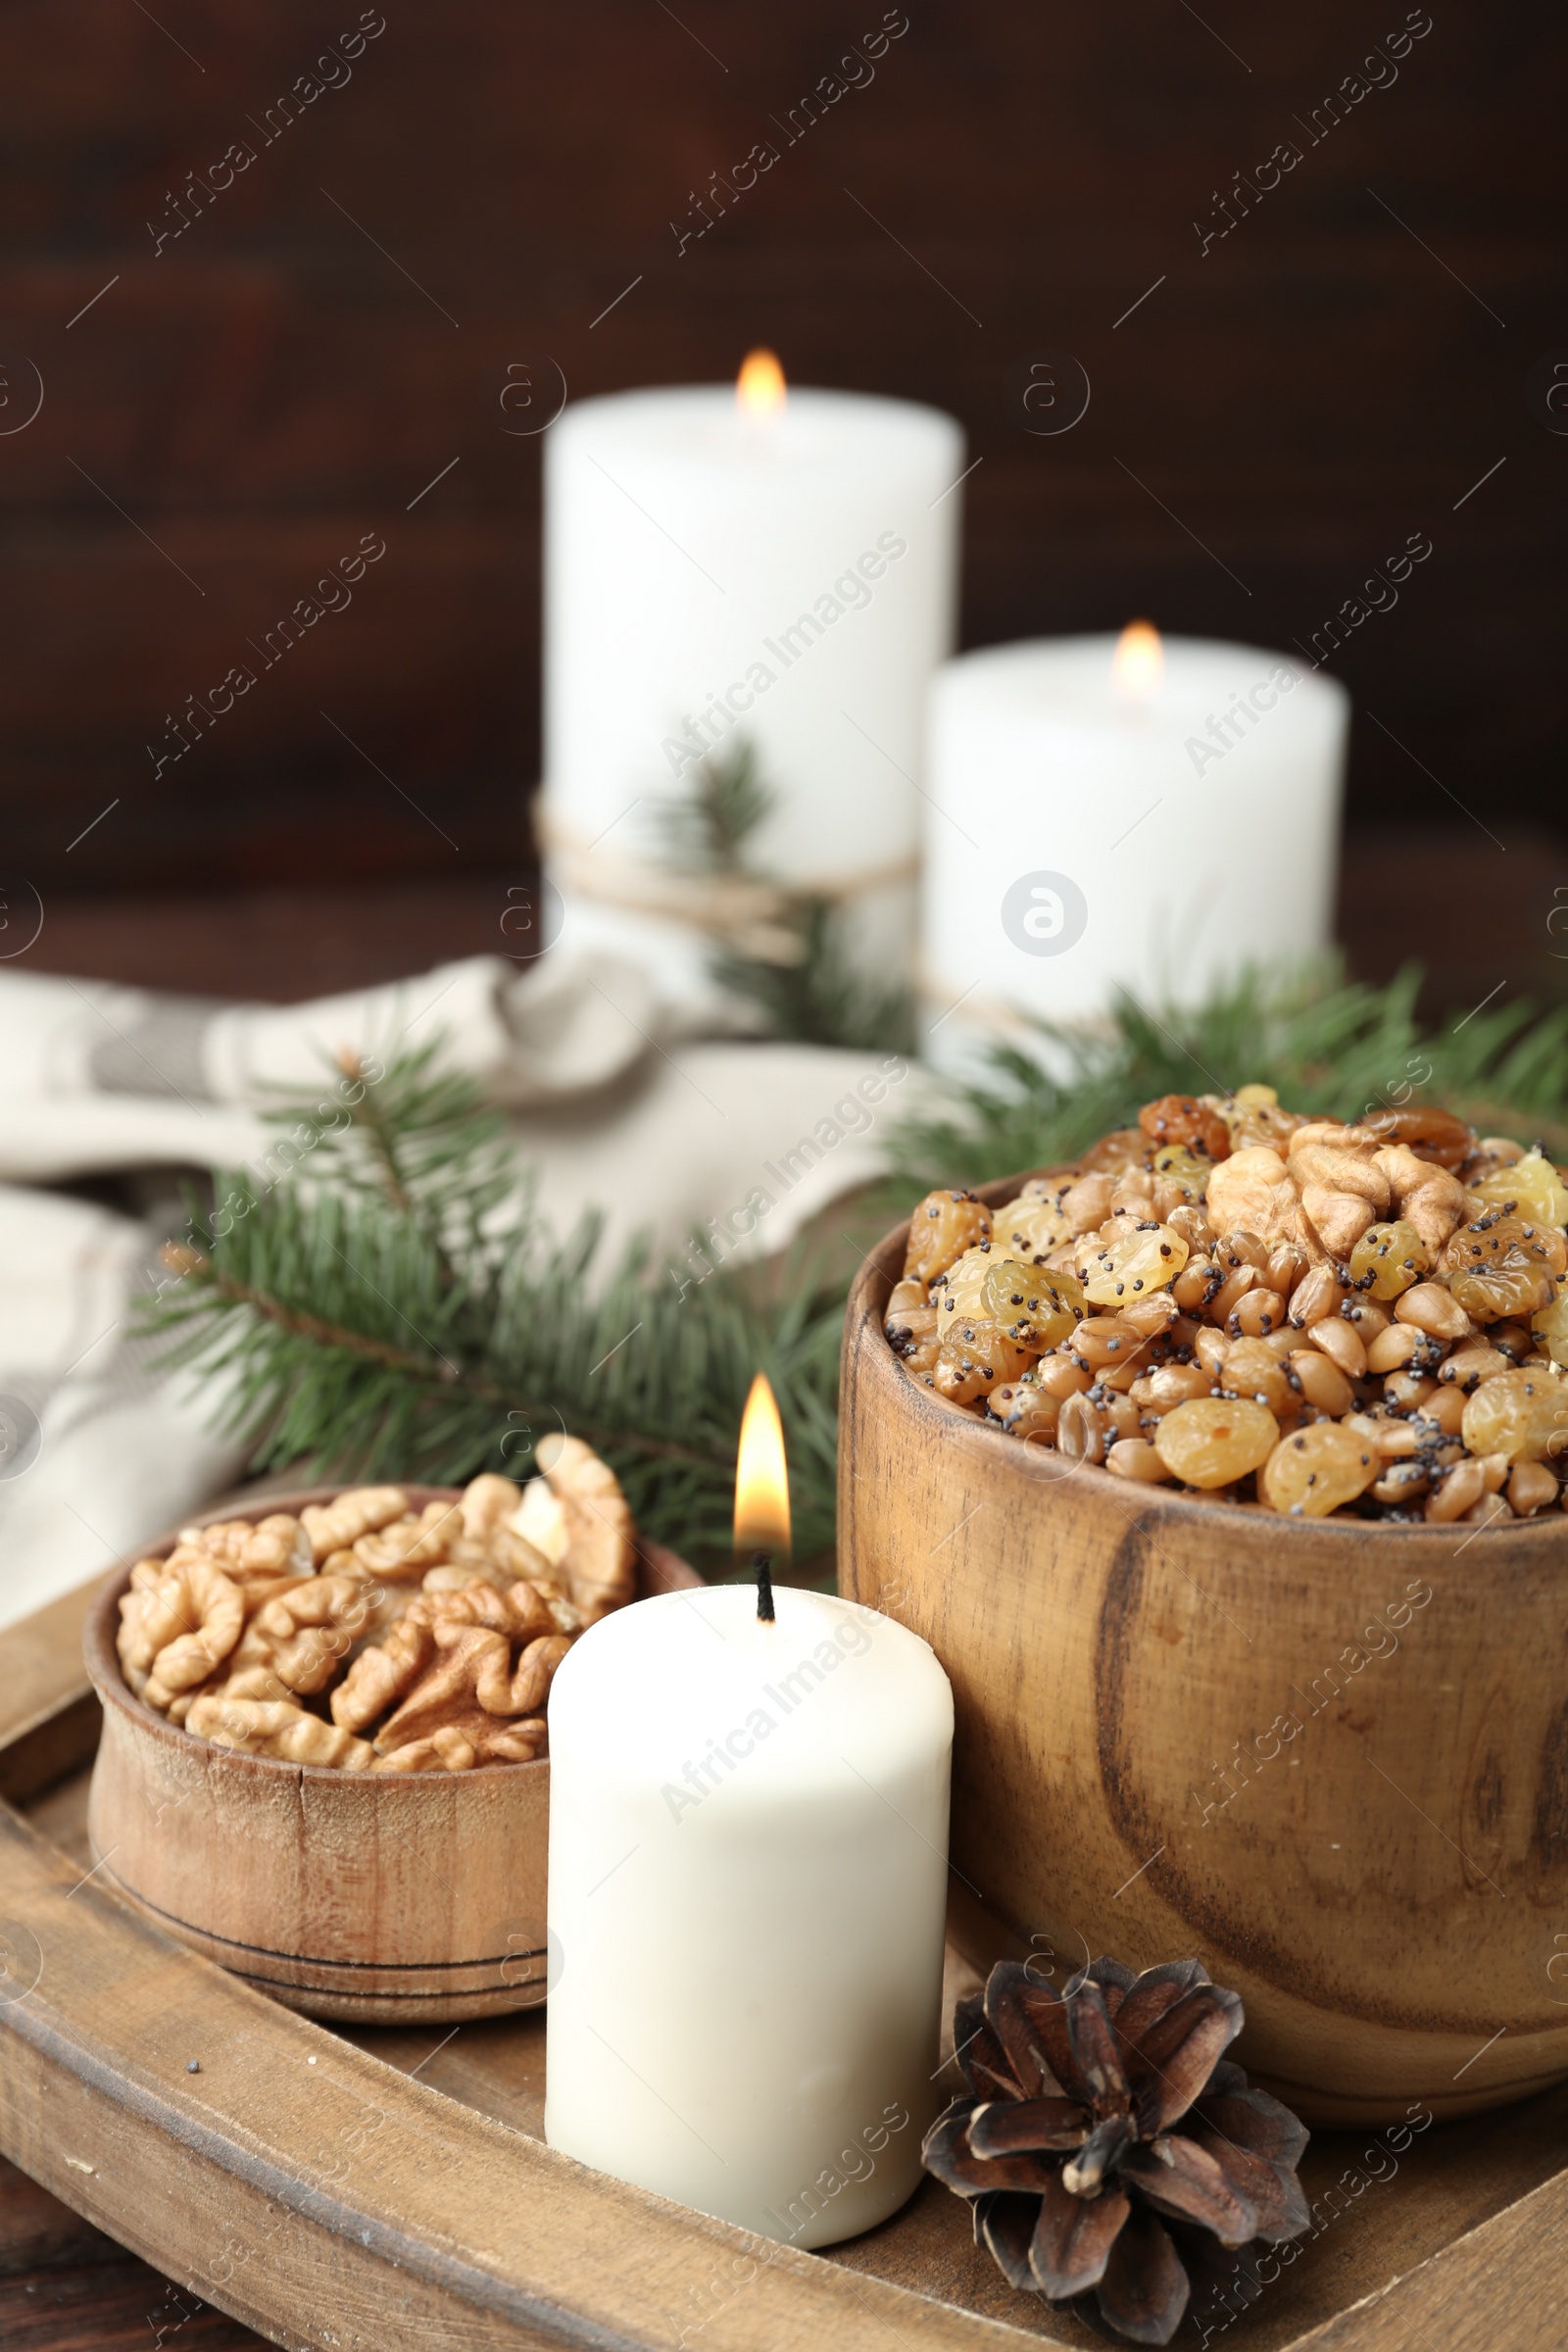 Photo of Traditional Christmas slavic dish kutia and burning candle on wooden tray, closeup. Space for text